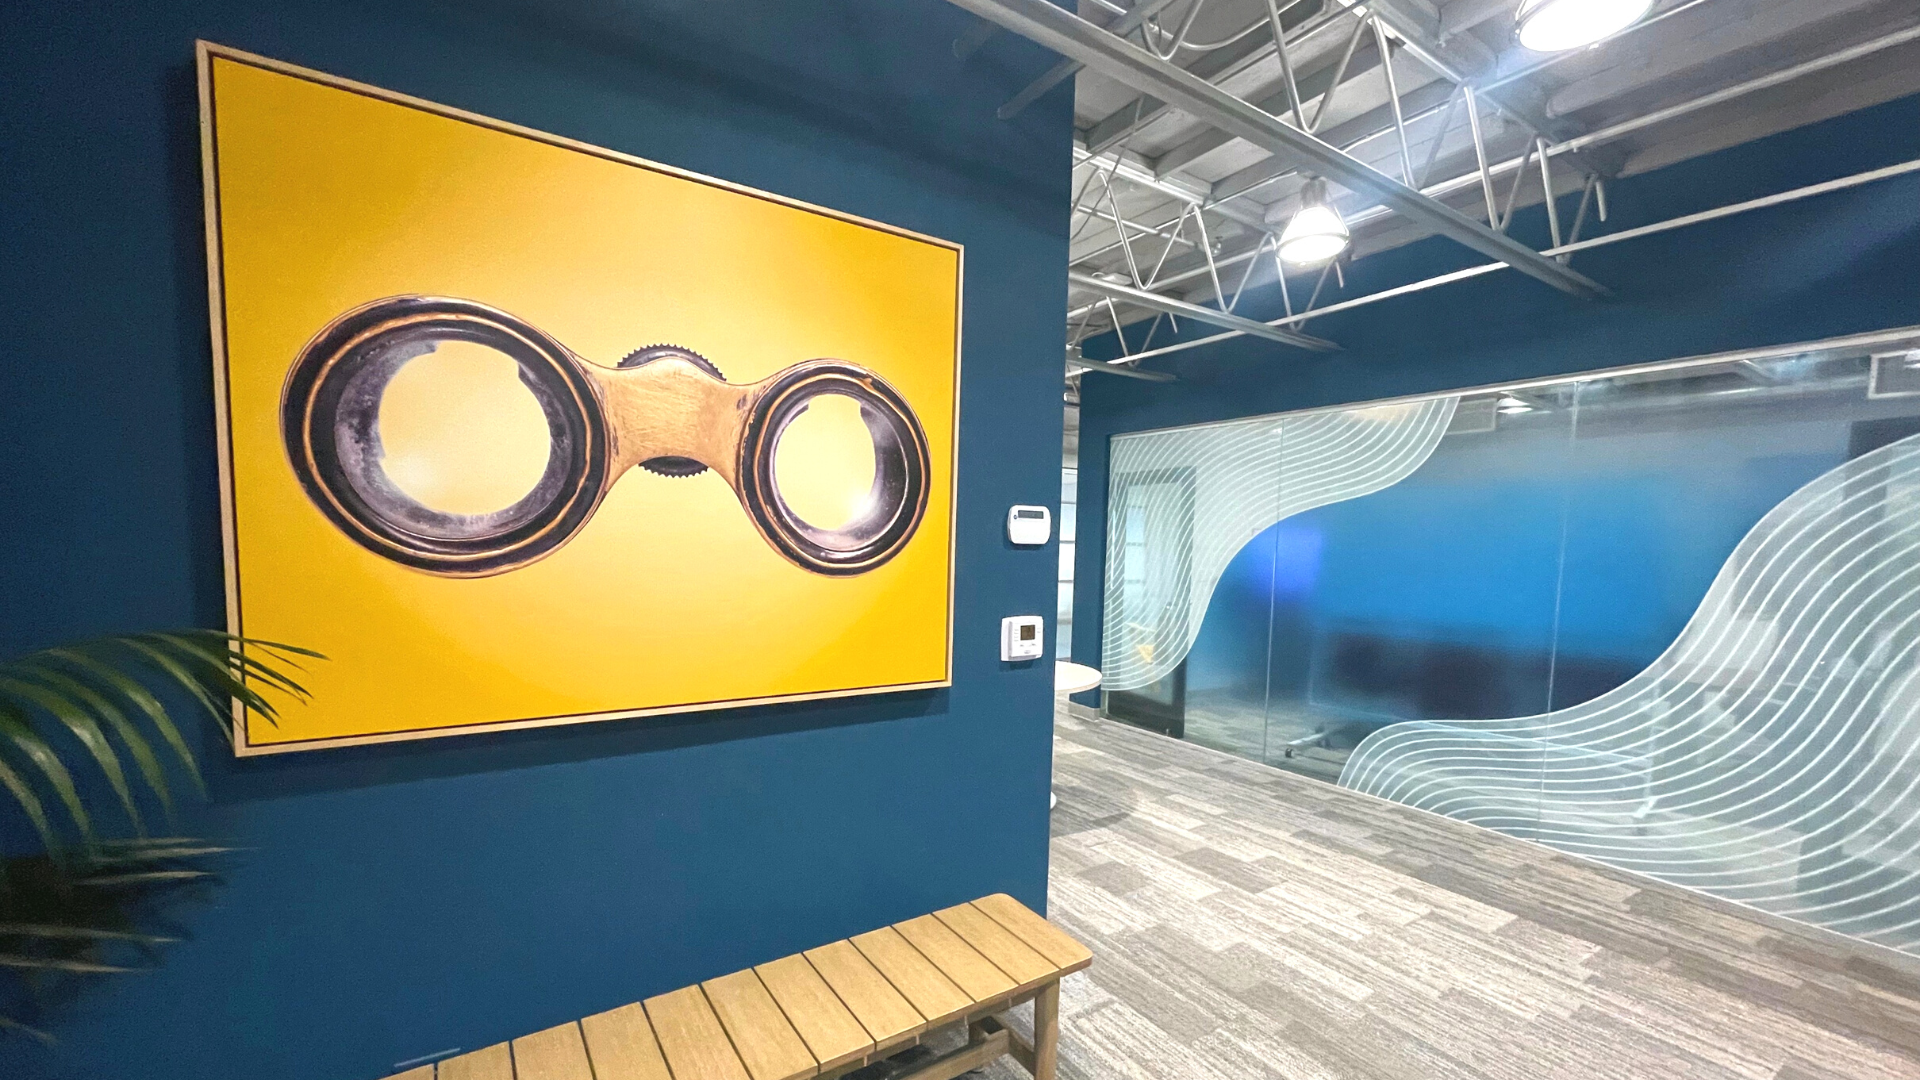 San Diego interior design office space lobby hallway with bench, framed yellow image of binoculars, and conference room with blue and white detailing